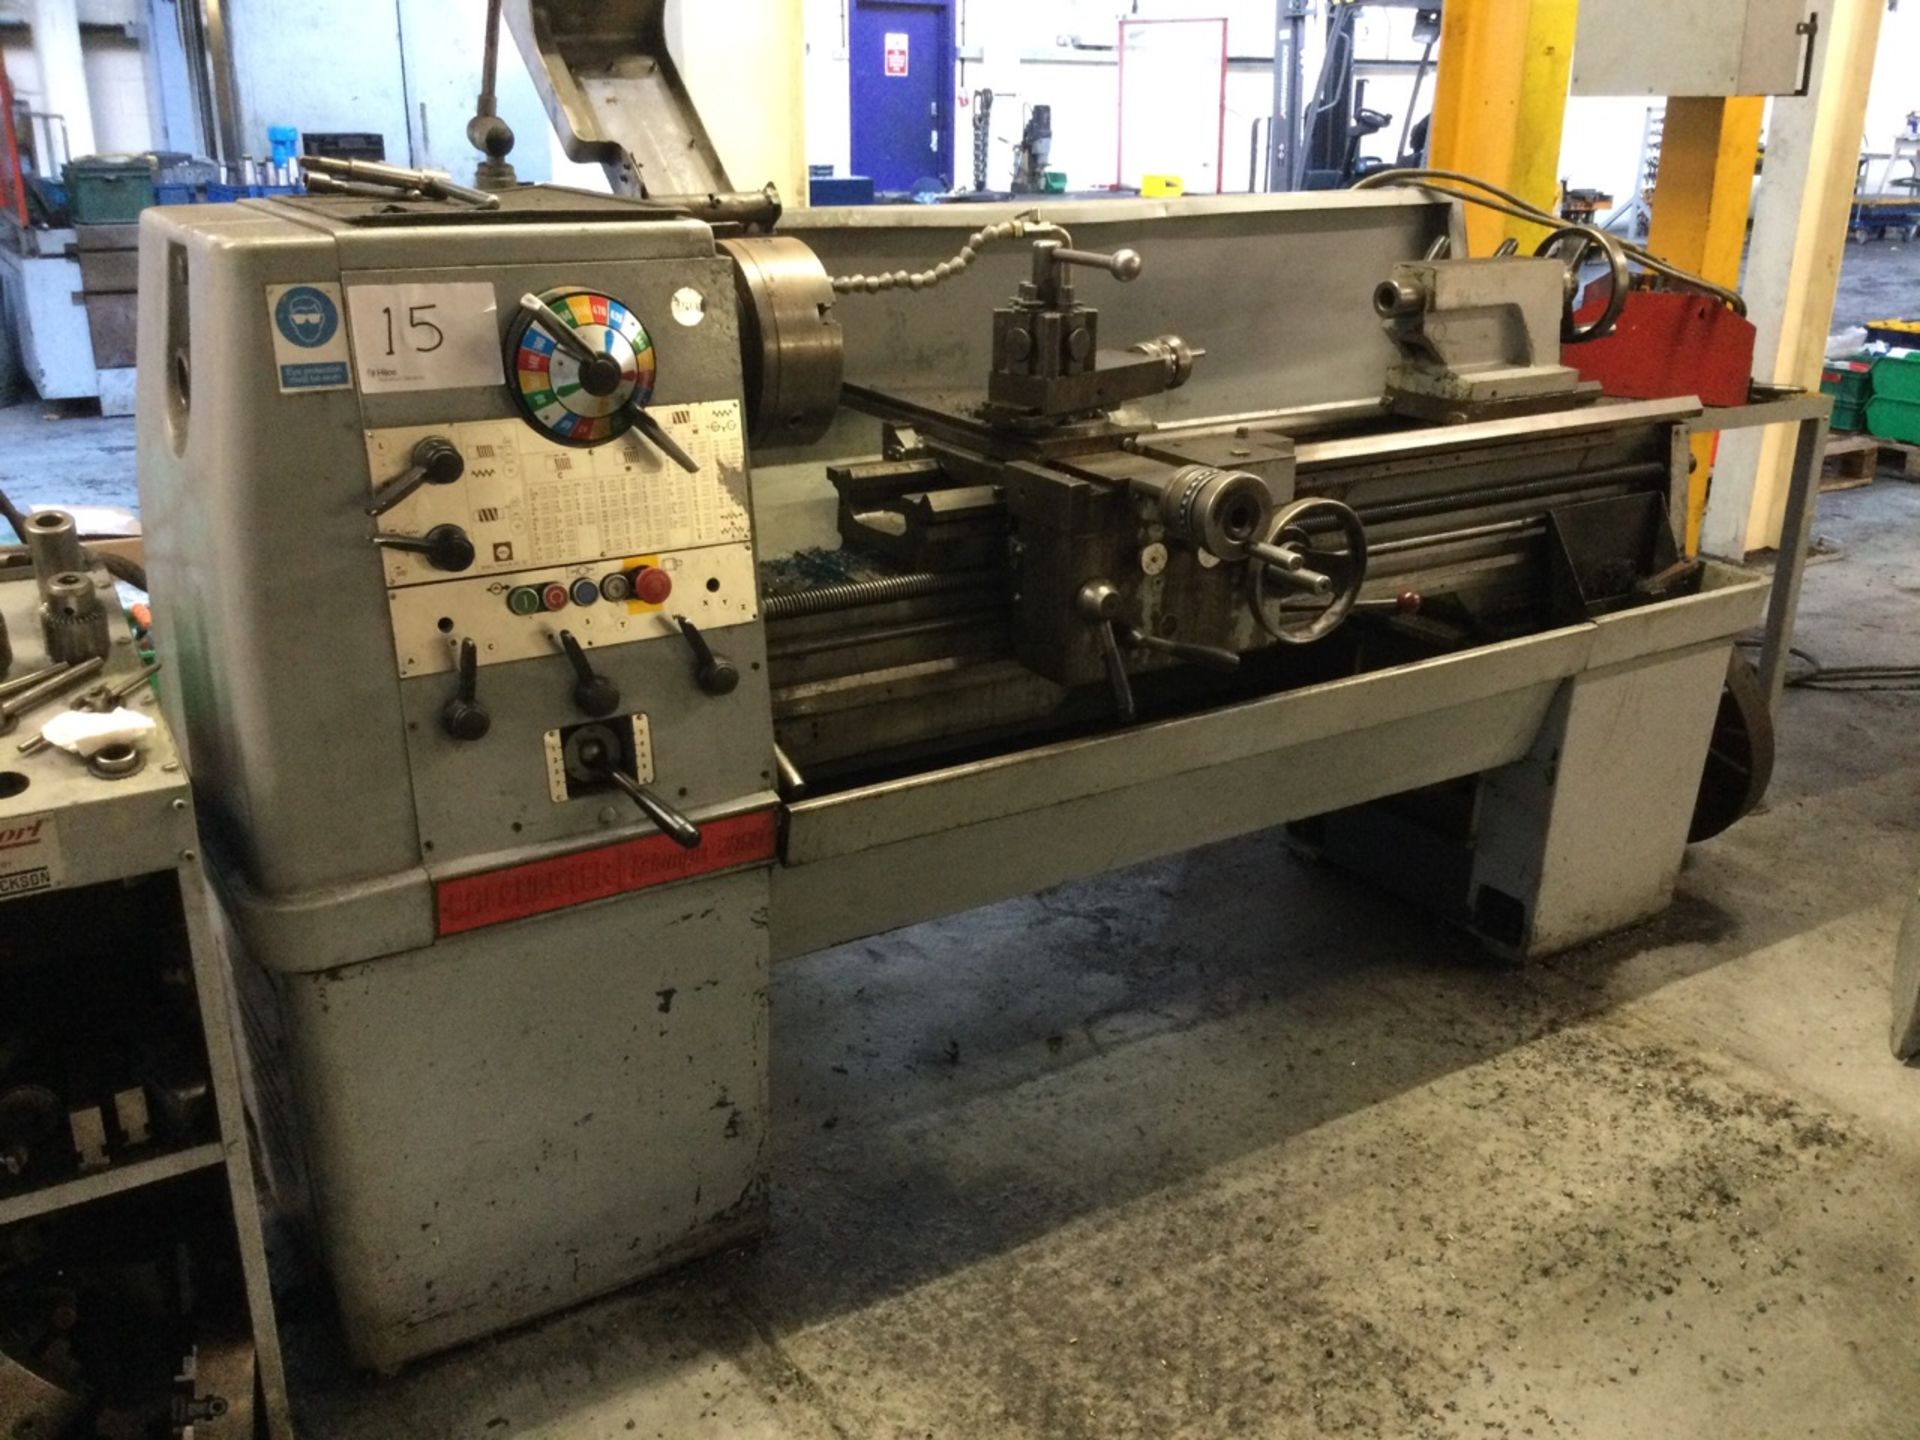 1 Colchester Triumph, 2000, gap bed centre lathe, 48" bed, with tooling as photographed, Serial Numb - Image 2 of 3